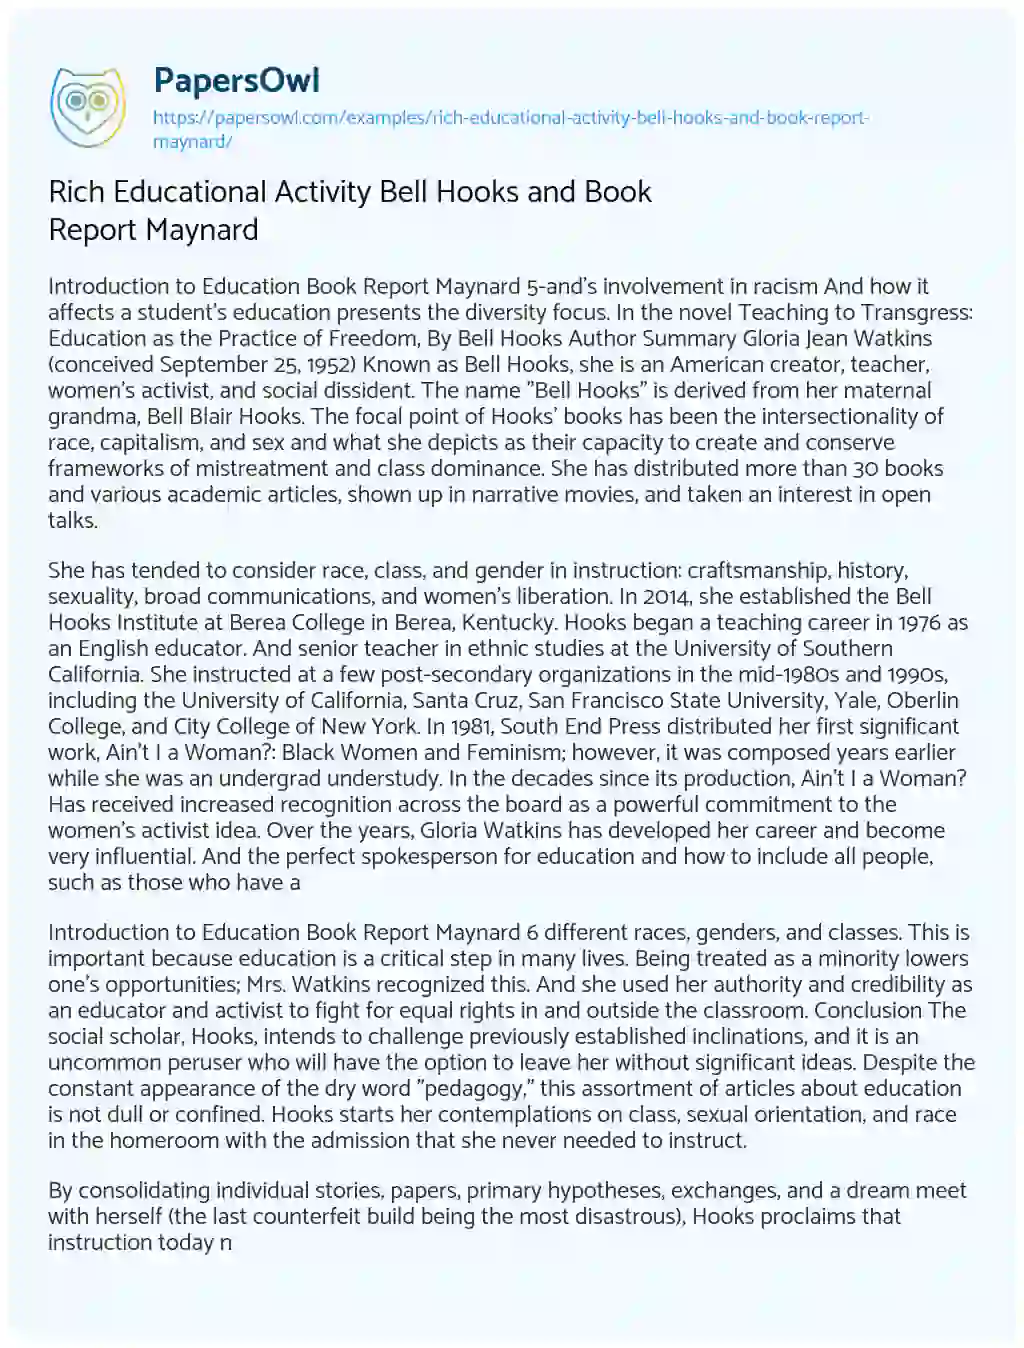 Essay on Rich Educational Activity Bell Hooks and Book Report Maynard